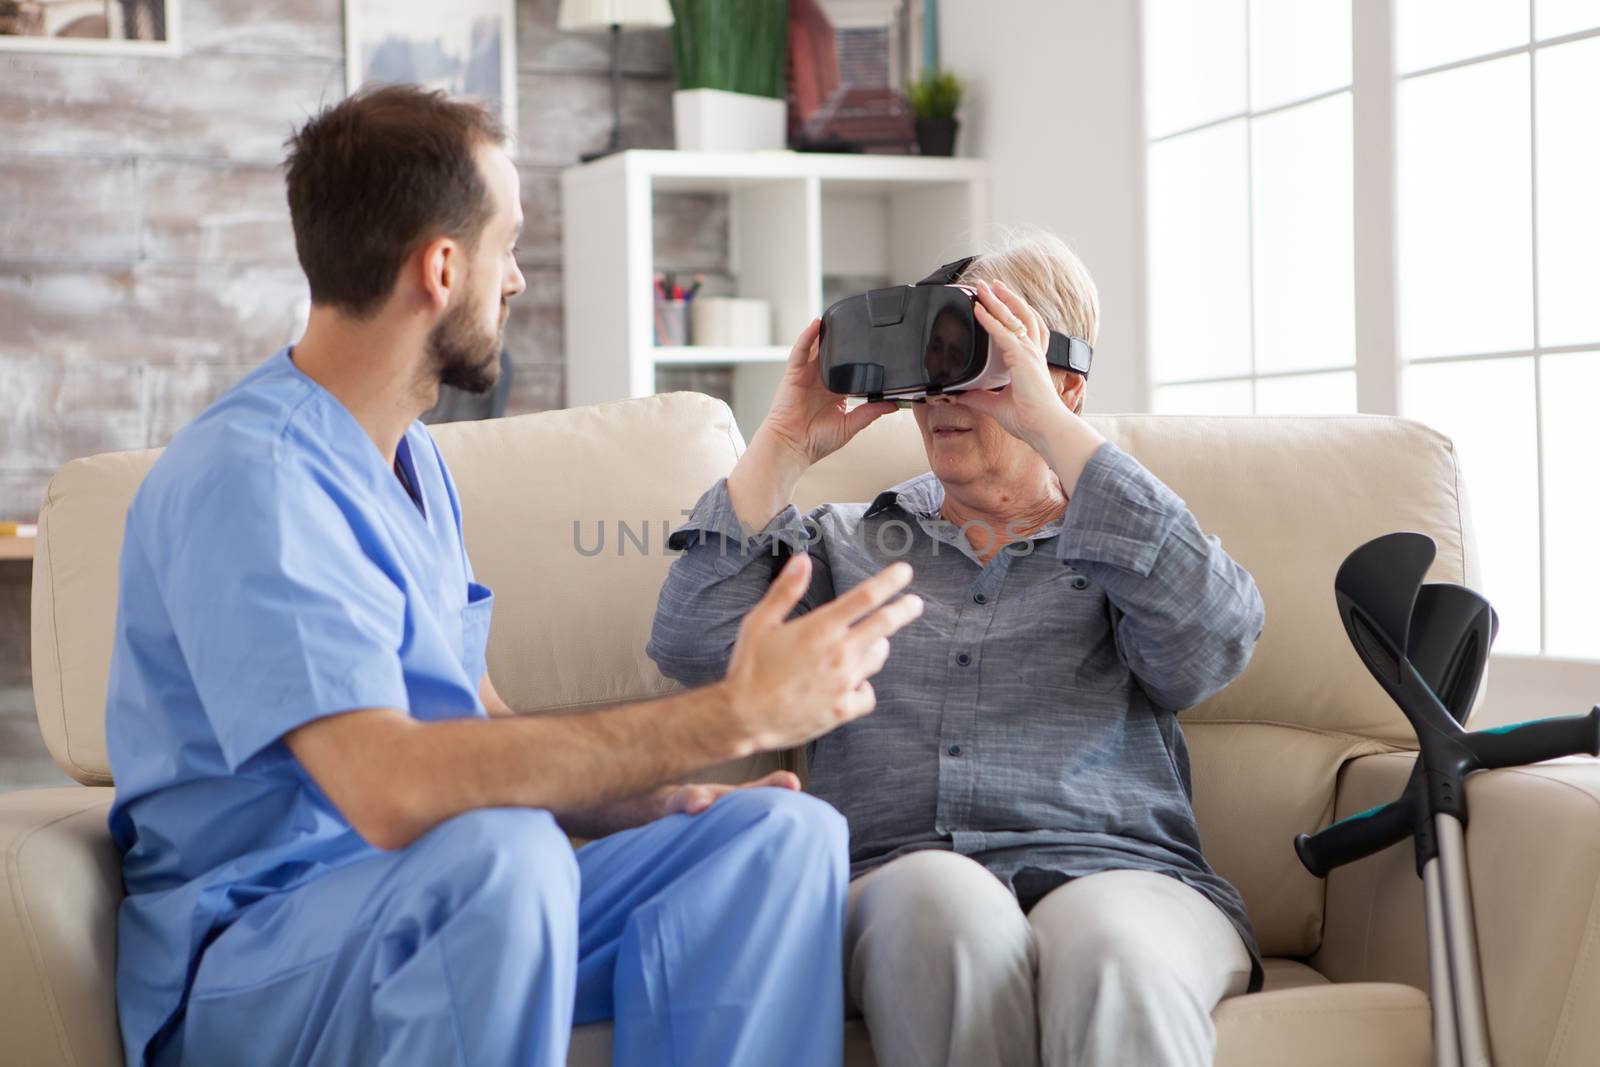 Senior woman in nursing amased while using vr glasses. Young doctor and elderly age woman.